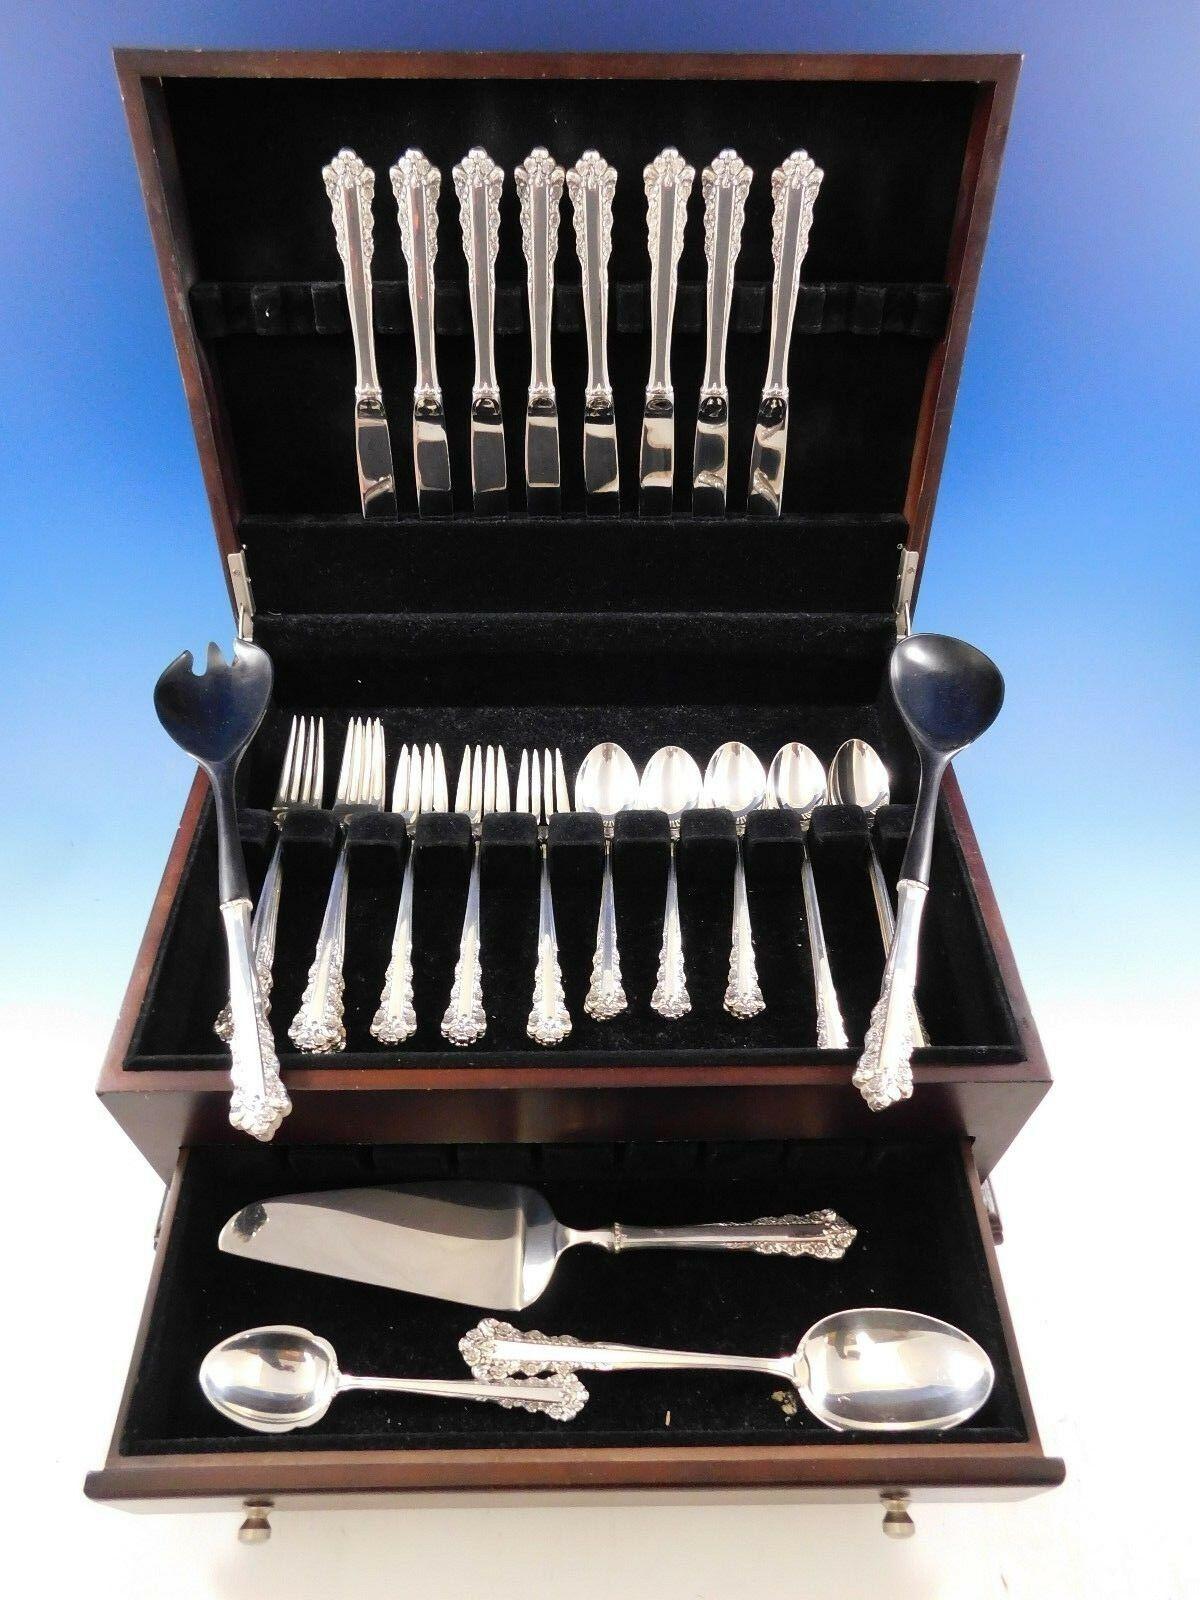 Belle Meade by Lunt sterling silver Flatware set, 45 pieces. This set includes:

8 knives, 9 1/8